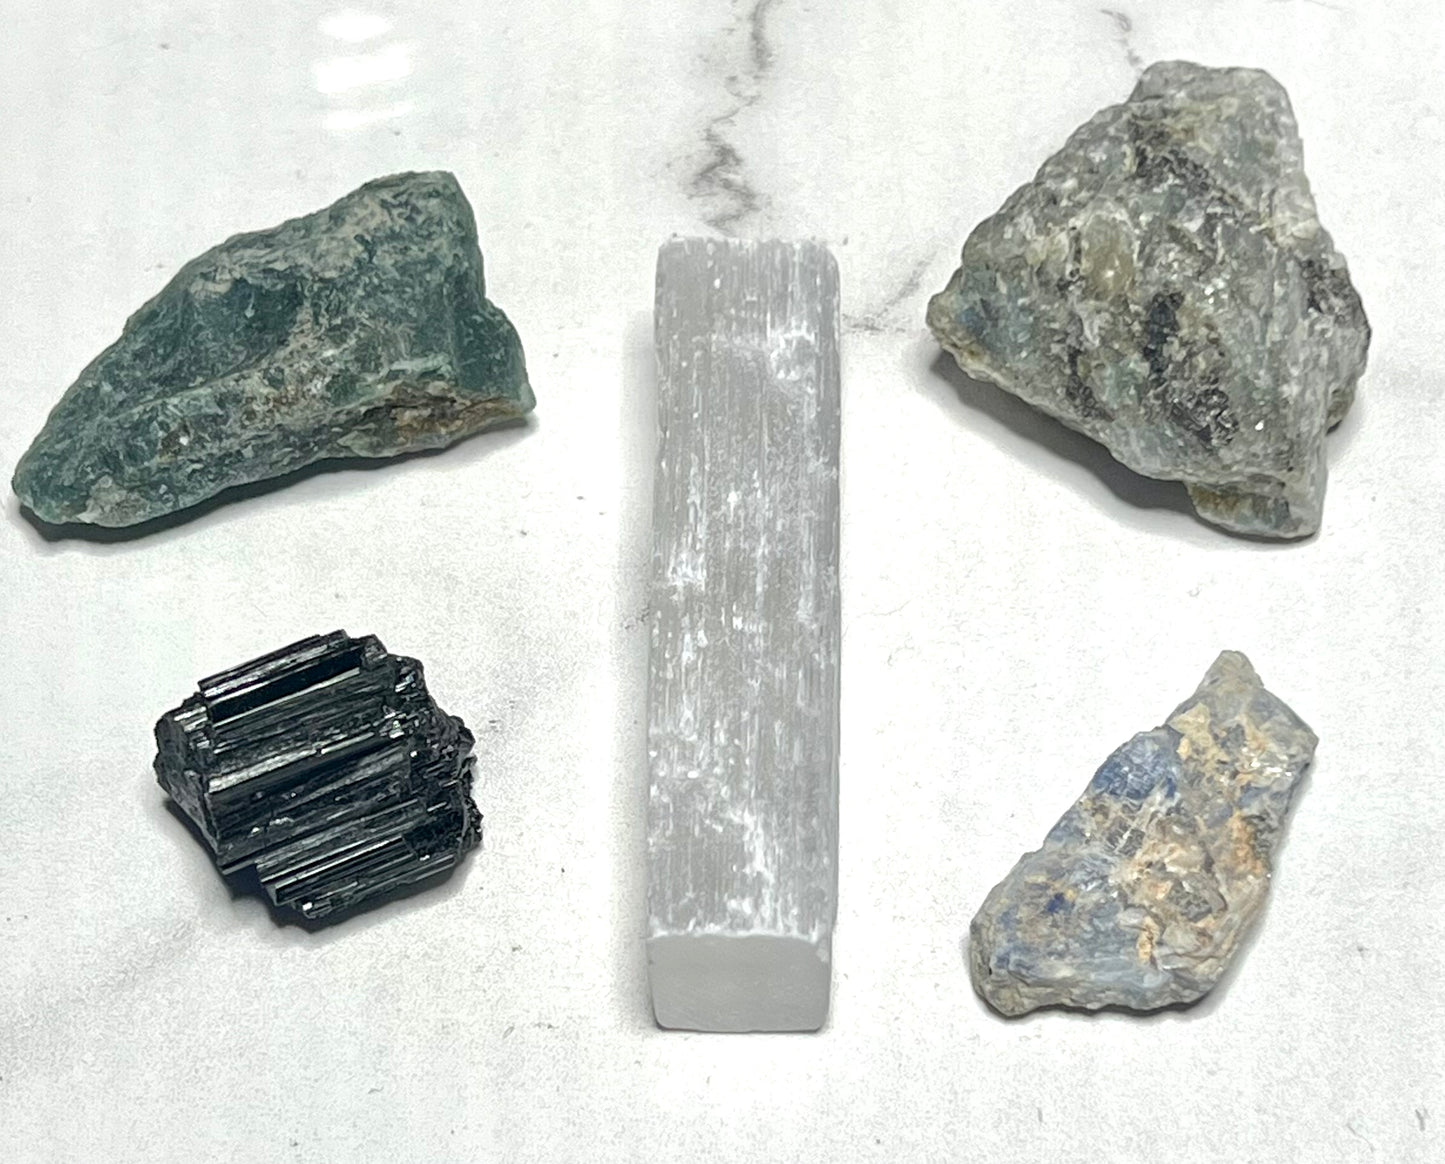 Cleanse and Refresh Tumble Pack - Moss Agate, Labradorite, Black Tourmaline, Blue Kyanite and Satin Spar